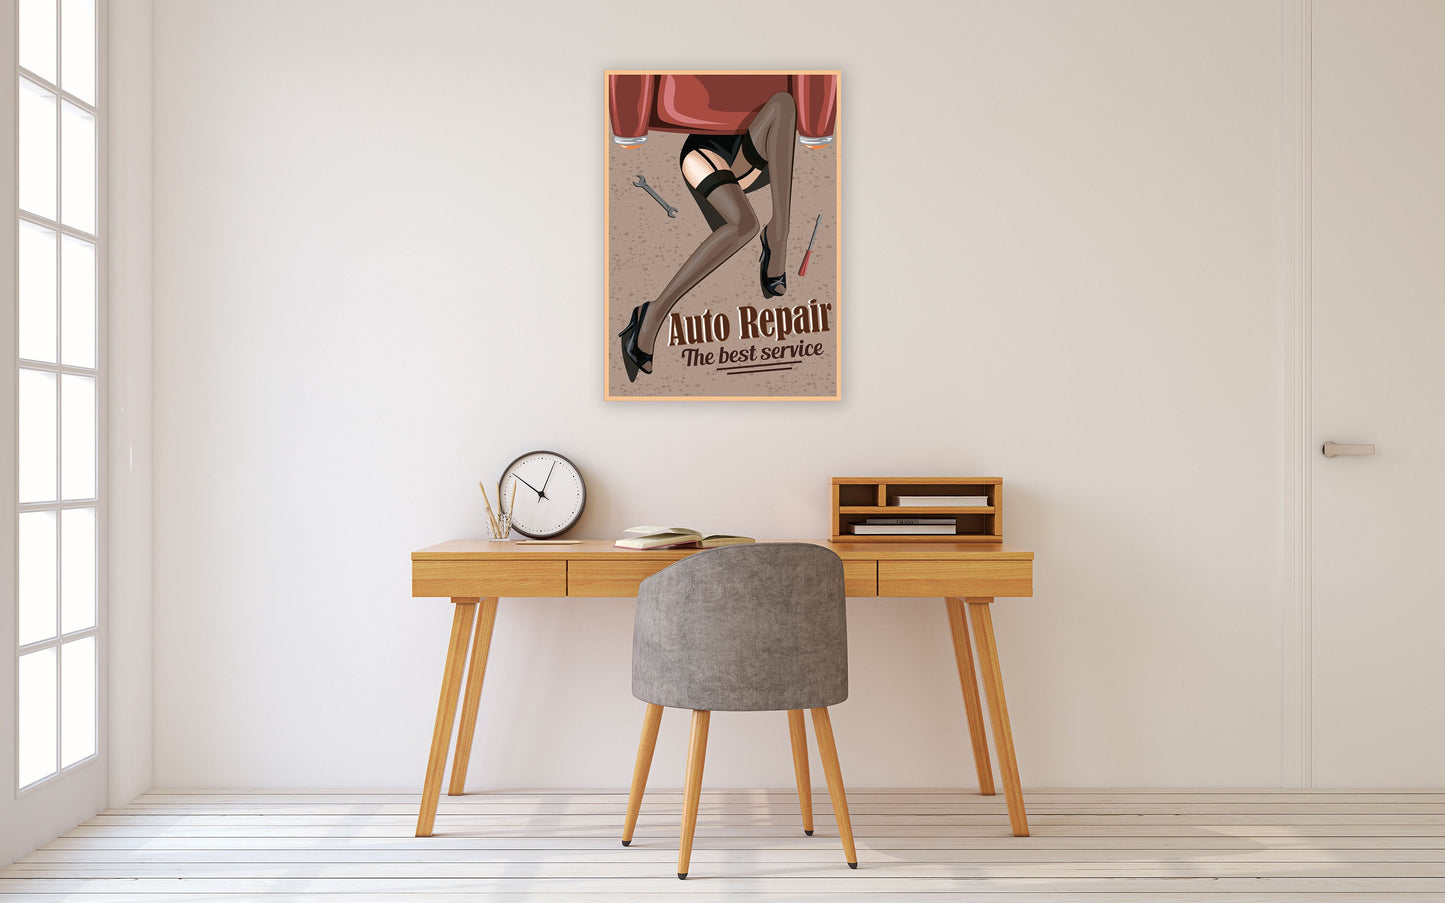 Woman butt photo, naked woman extra large wall art, nude woman poster,  extra large wall art